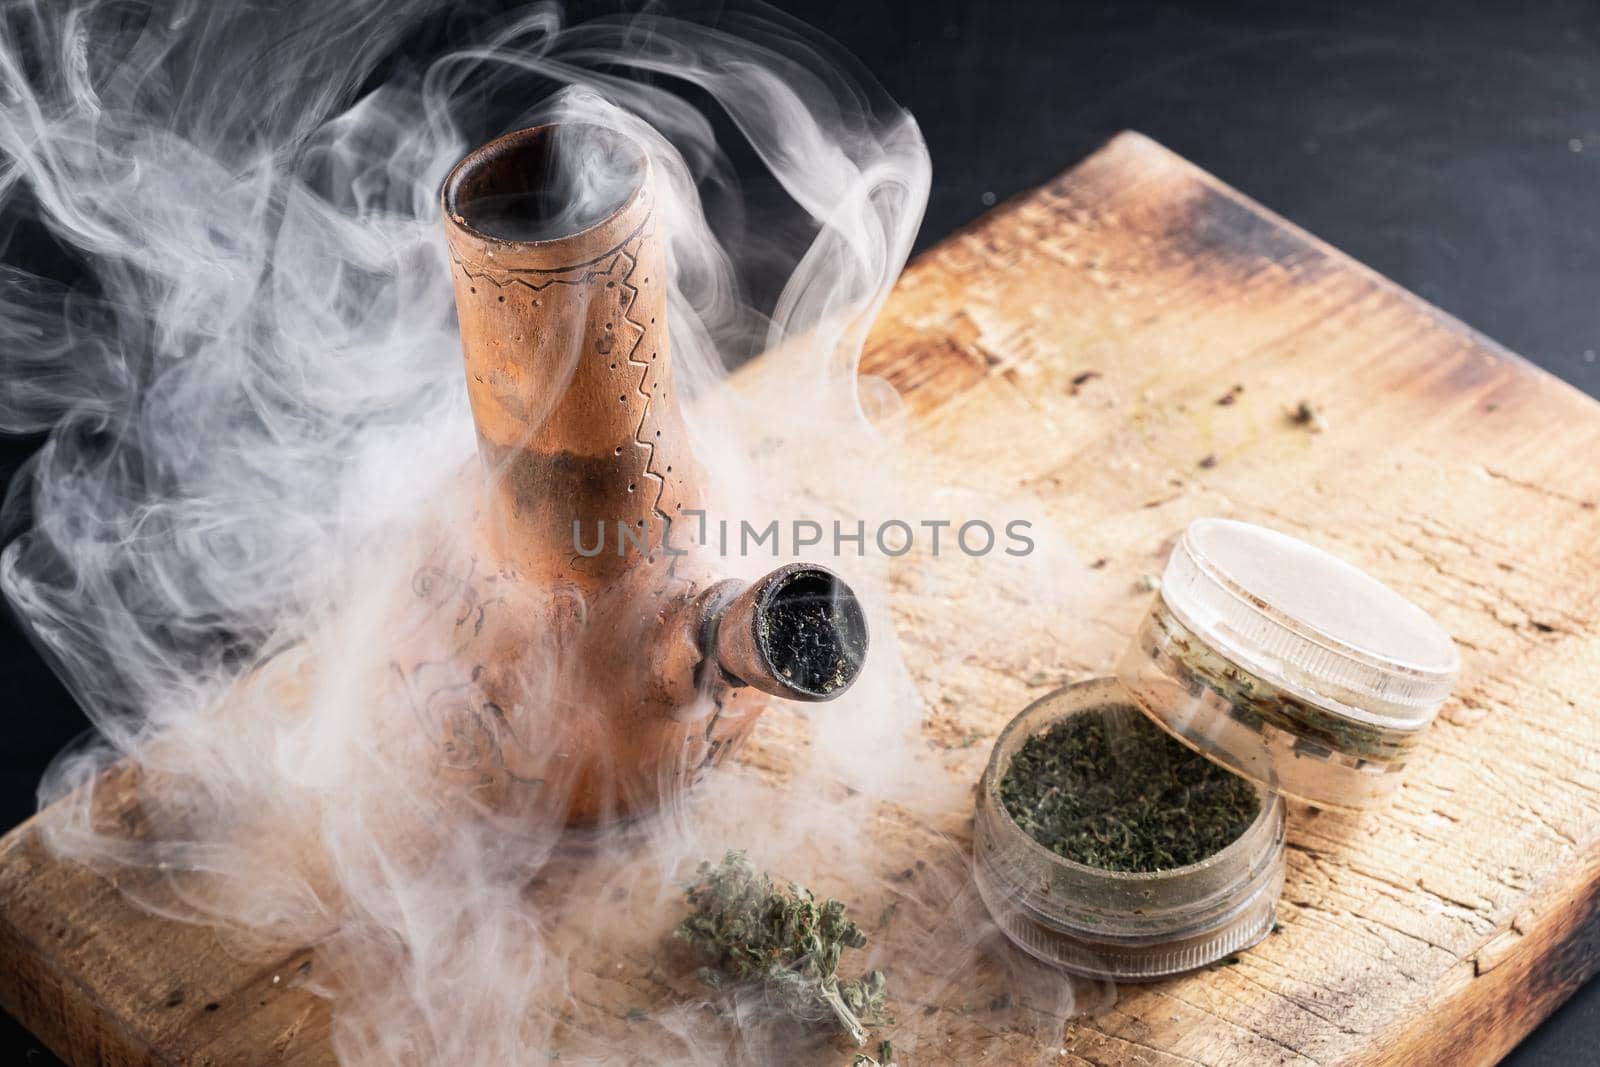 Old bong and open grinder cannabis and marijuana in smoke are located on the board. Wood background. Horizontal composition.